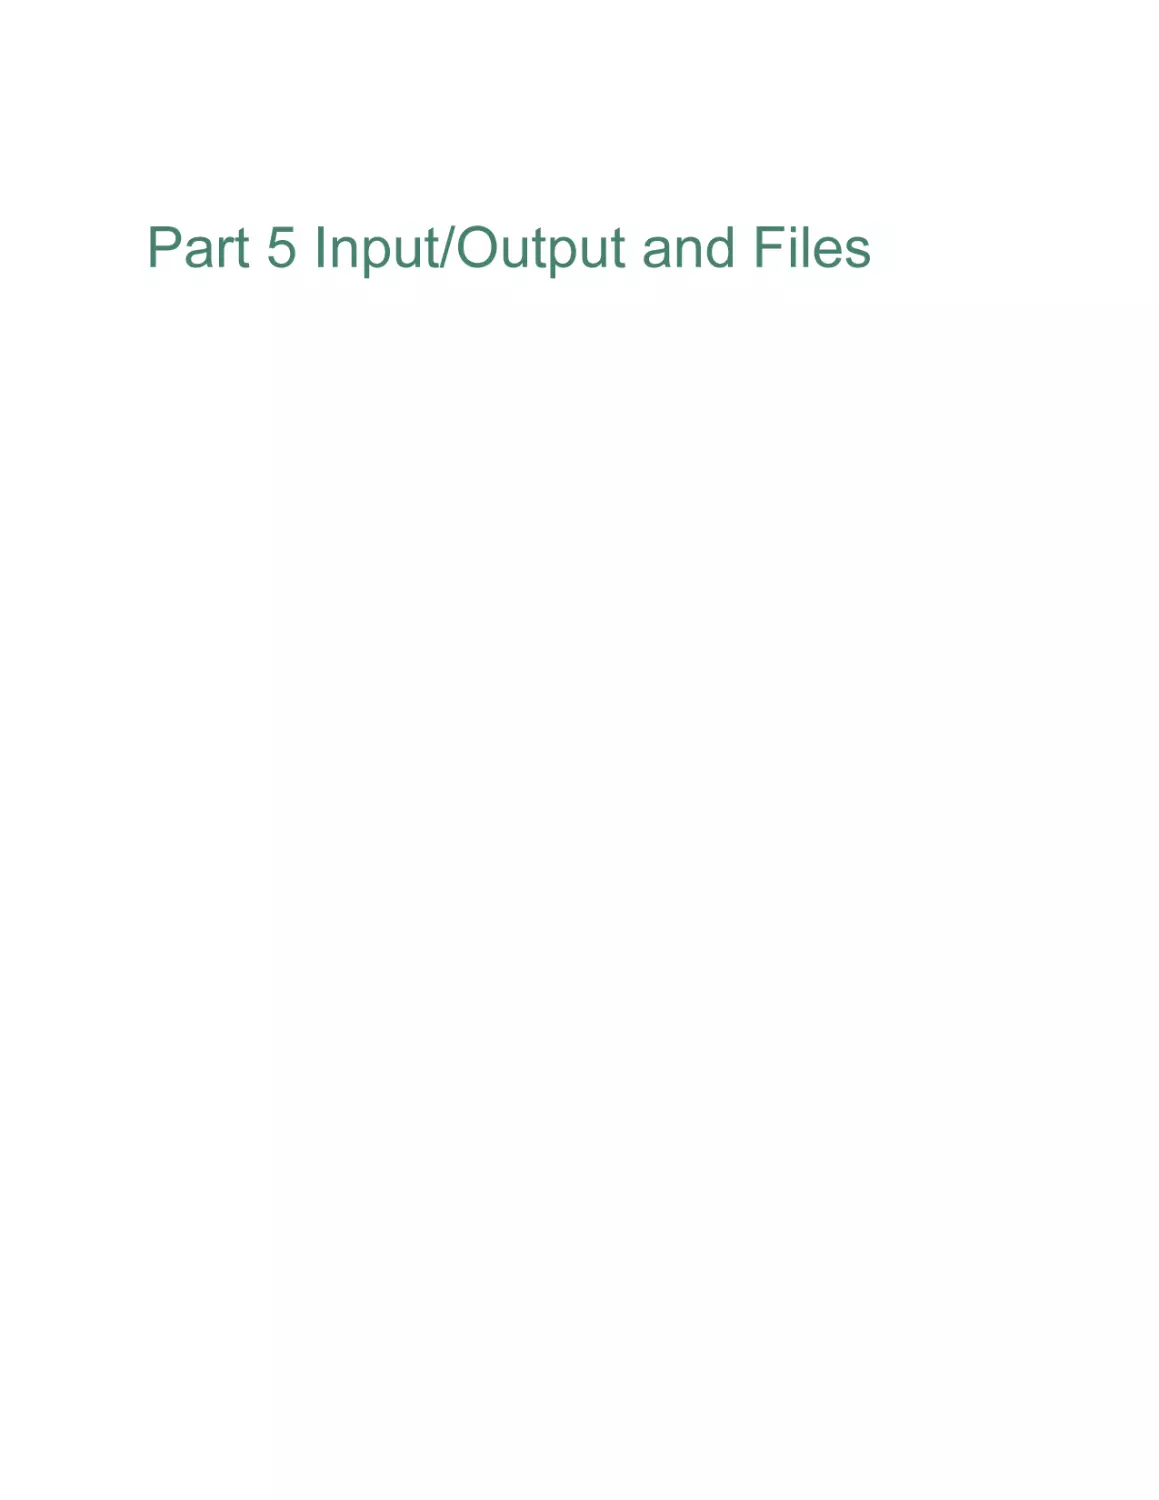 Part 5 Input/Output and Files